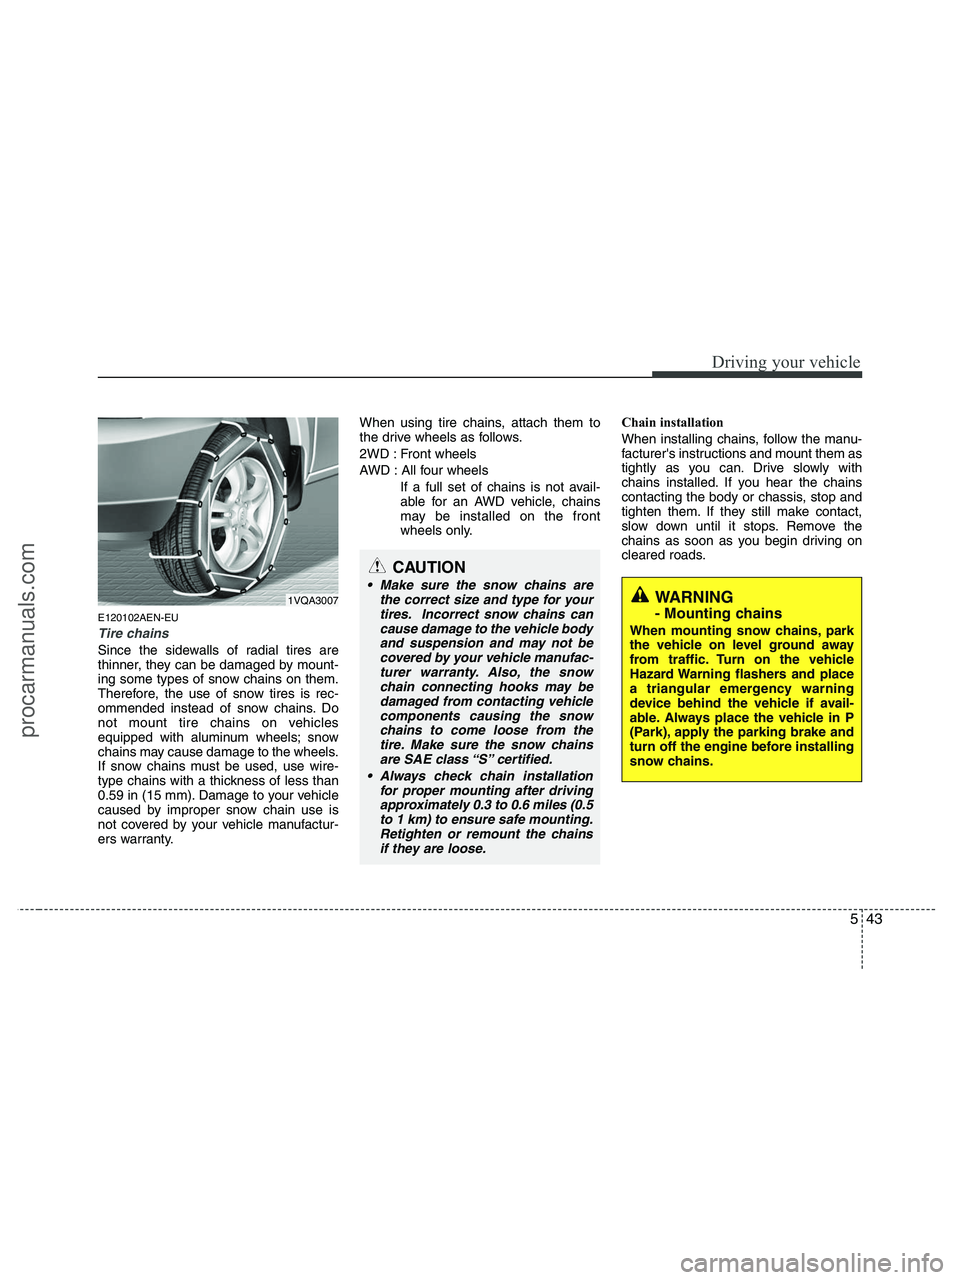 HYUNDAI VERACRUZ 2010  Owners Manual 543
Driving your vehicle
E120102AEN-EU
Tire chains 
Since the sidewalls of radial tires are
thinner, they can be damaged by mount-
ing some types of snow chains on them.
Therefore, the use of snow tir